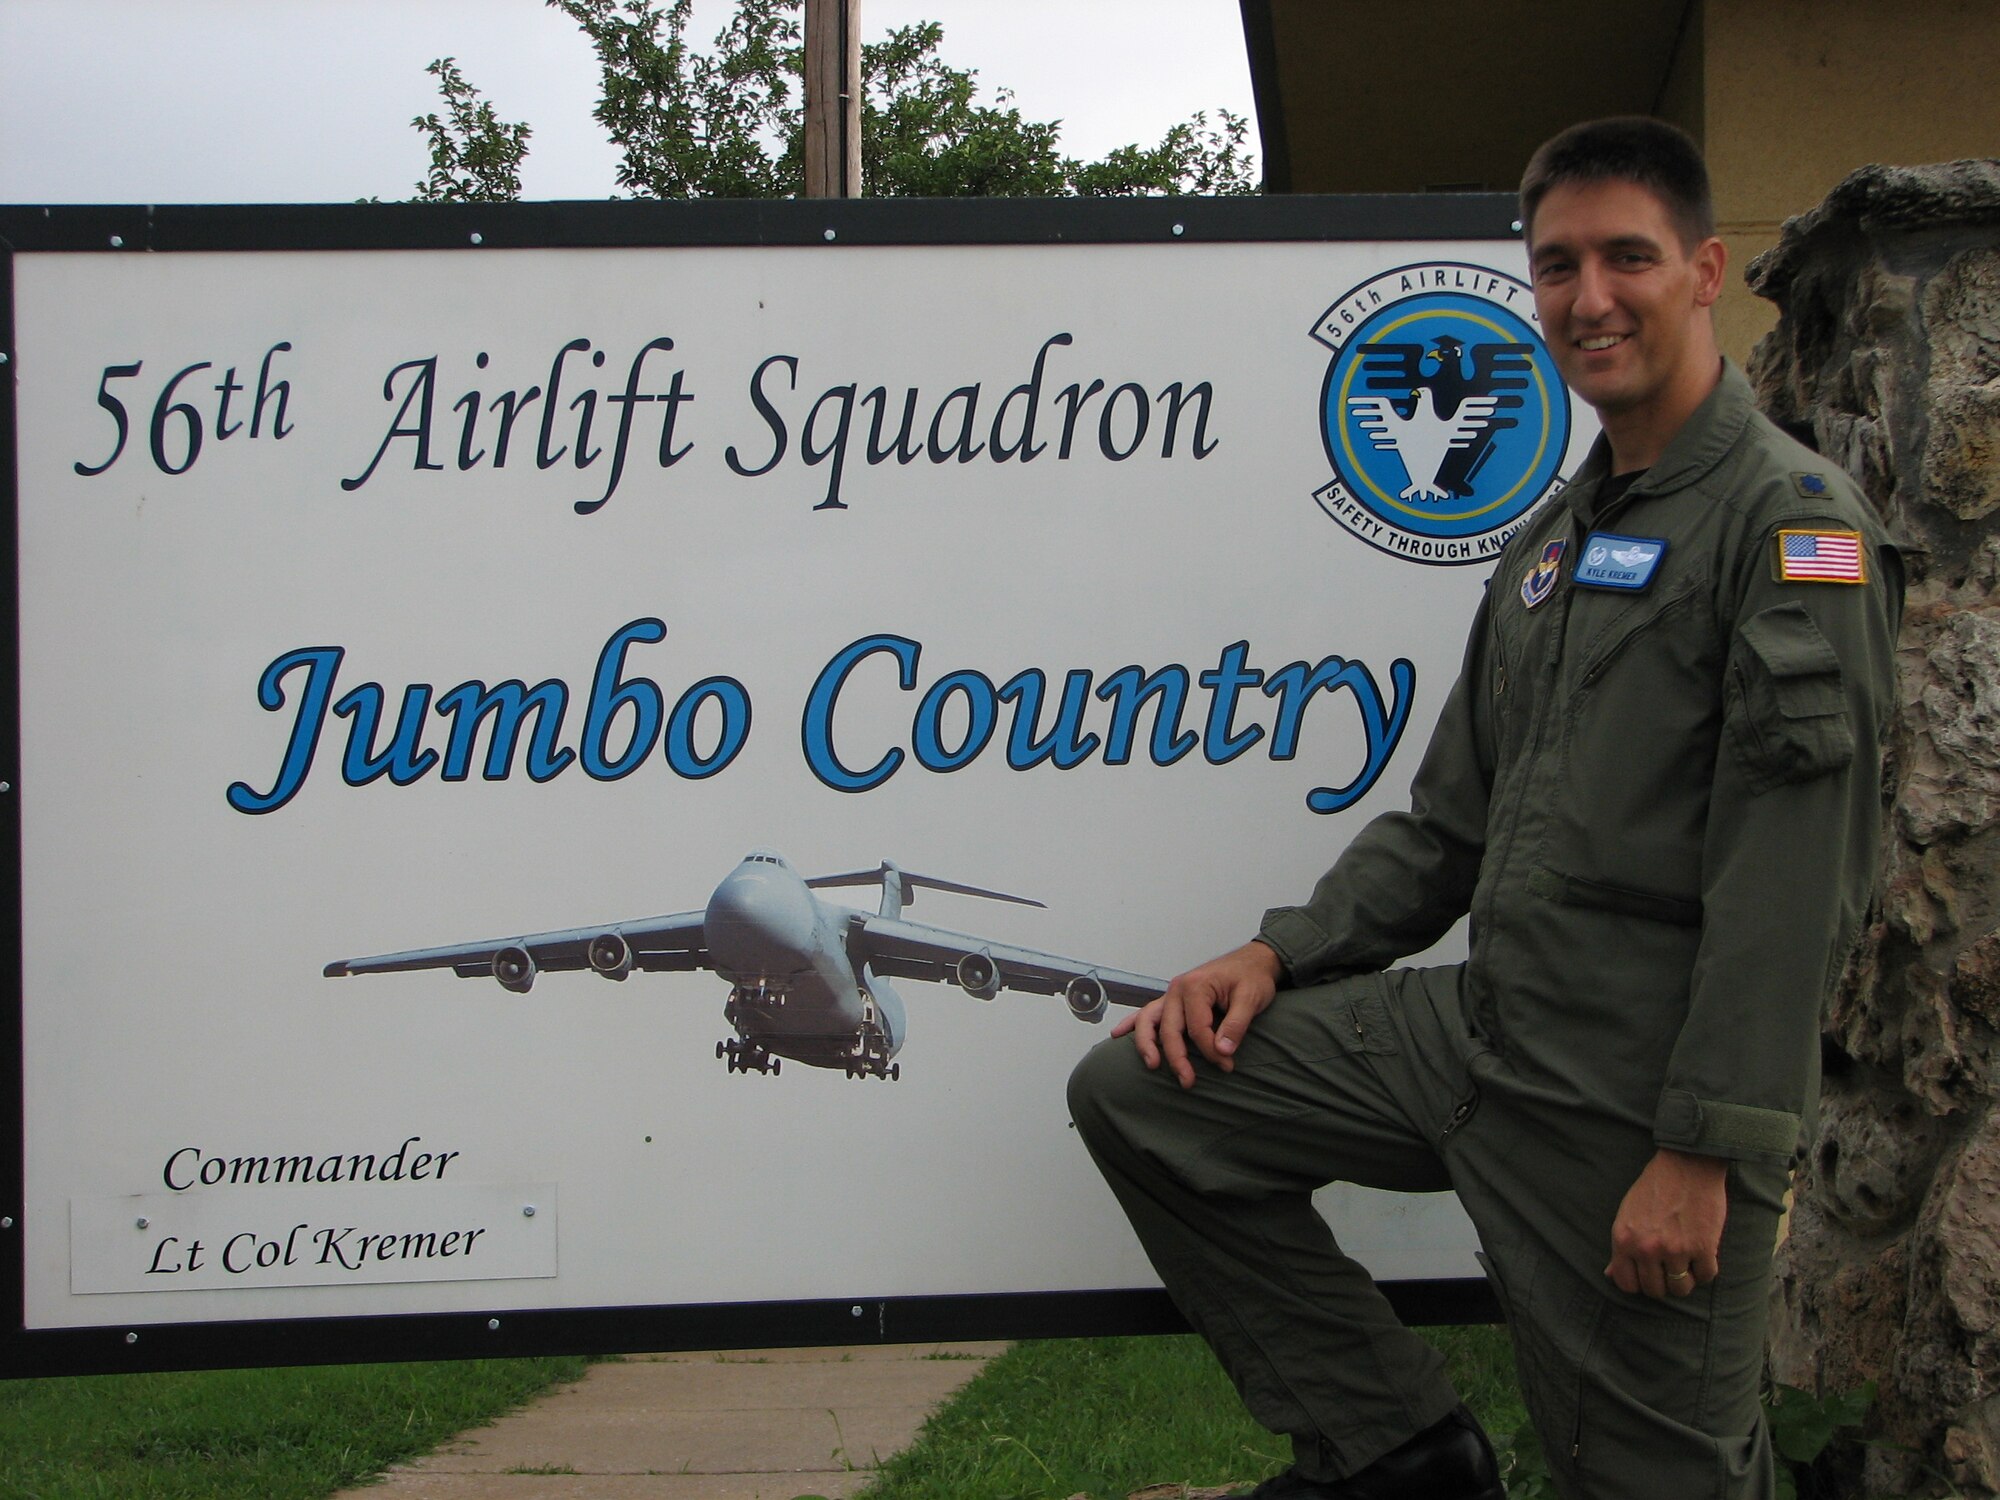 Then Lt. Col. Kyle J. Kremer, former 56th Airlift Squadron commander, stands in front of the 56th AS sign at the 97th Air Mobility Wing in 2007, Altus Air Force Base, Okla. Now Brig. Gen. Kremer is the Director, Global Reach Programs, Office of the Assistant Secretary of the Air Force for Acquisition, Headquarters U.S. Air Force, Arlington, Virginia. (Courtesy photo by Brig. Gen. Kyle J. Kremer)